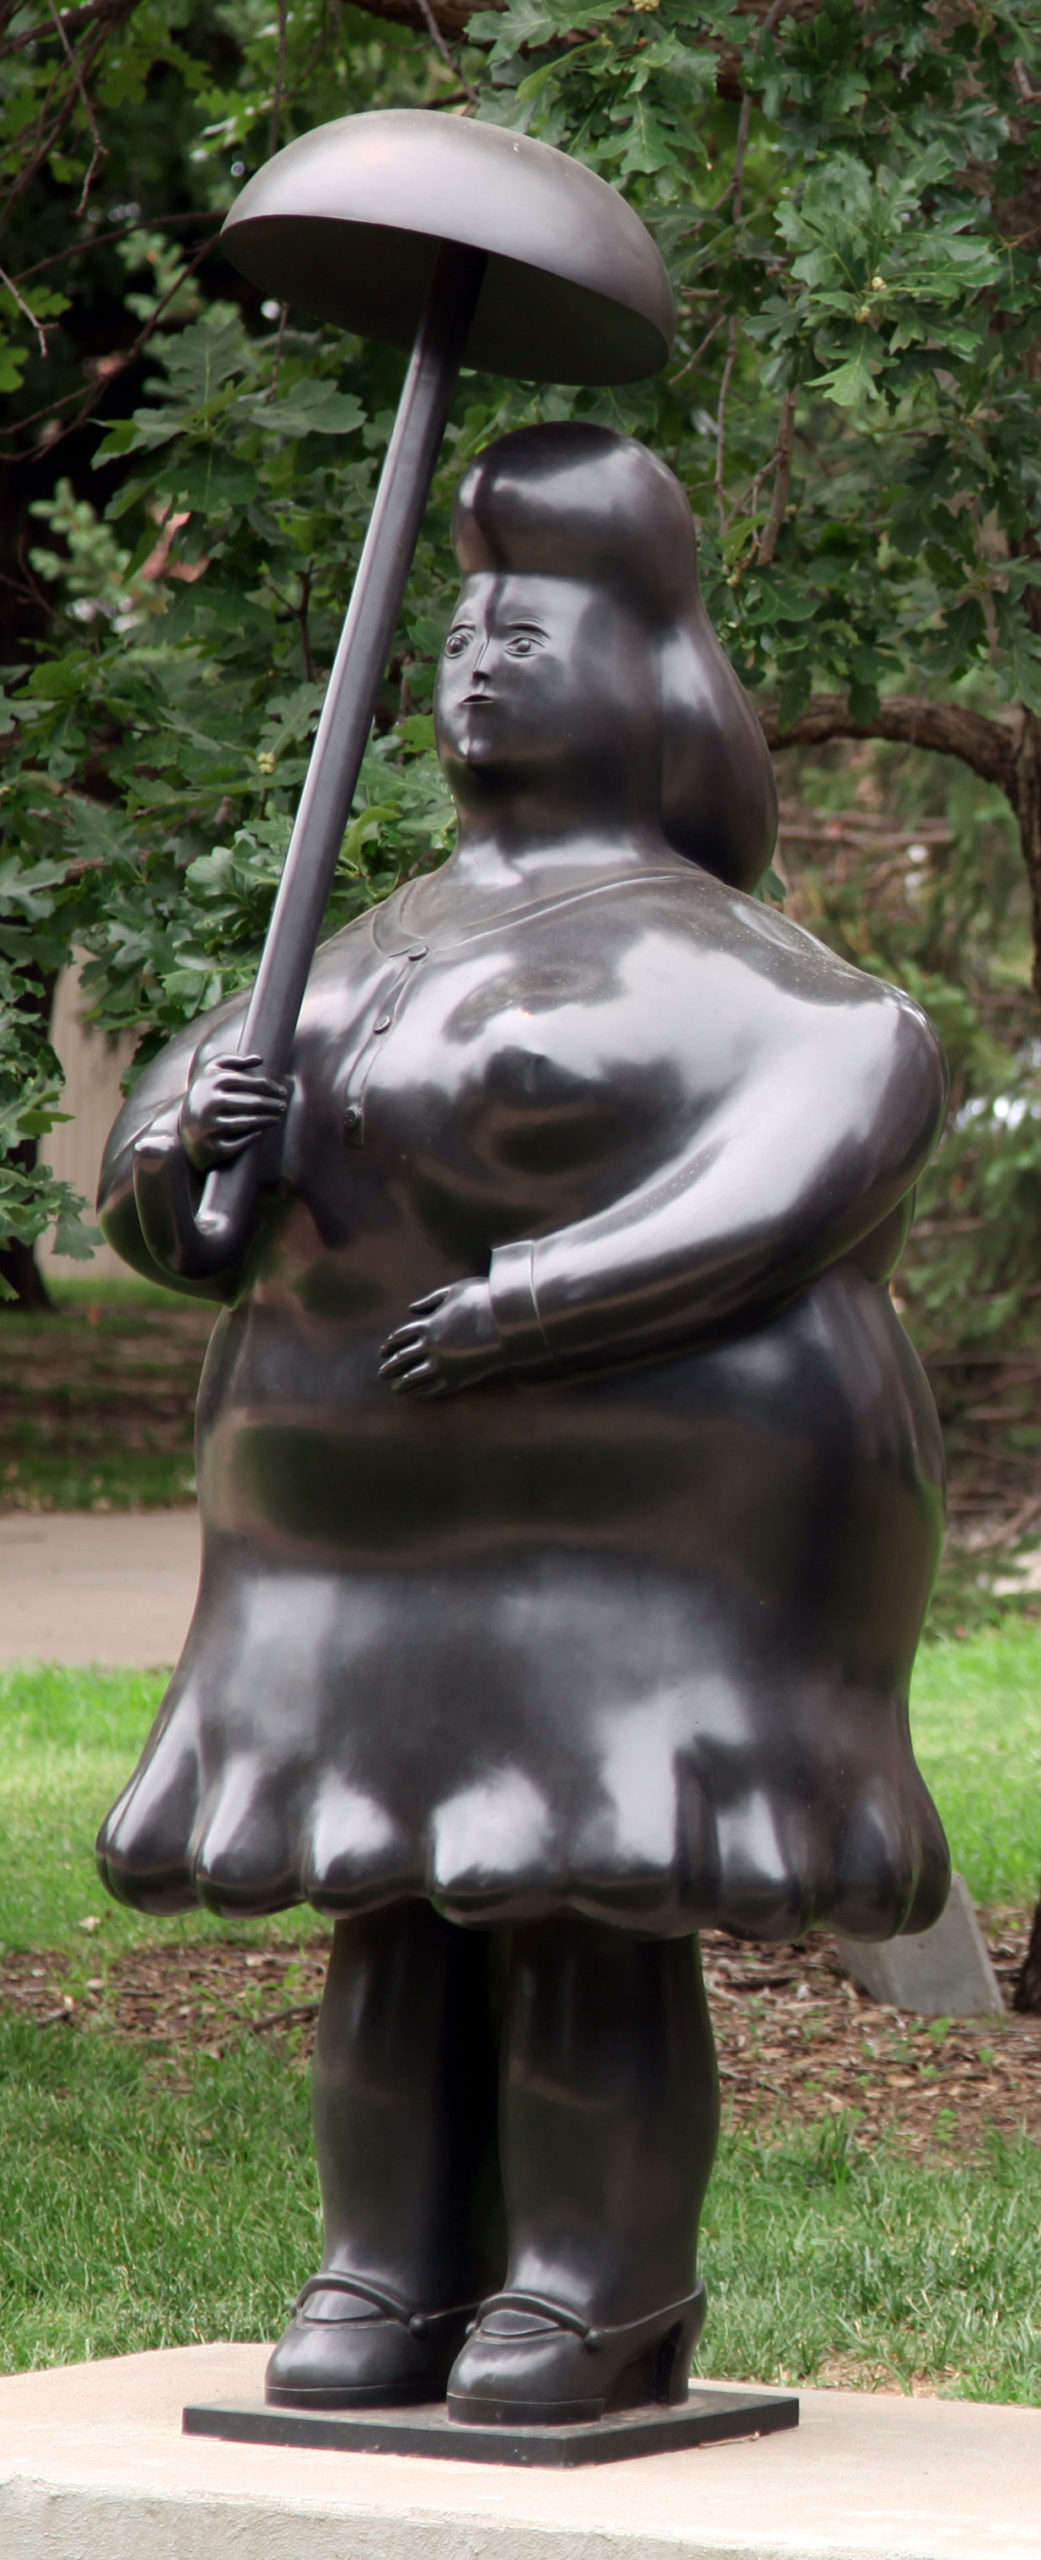 A large bronze statue of a woman with an umbrella stylized with rounded features